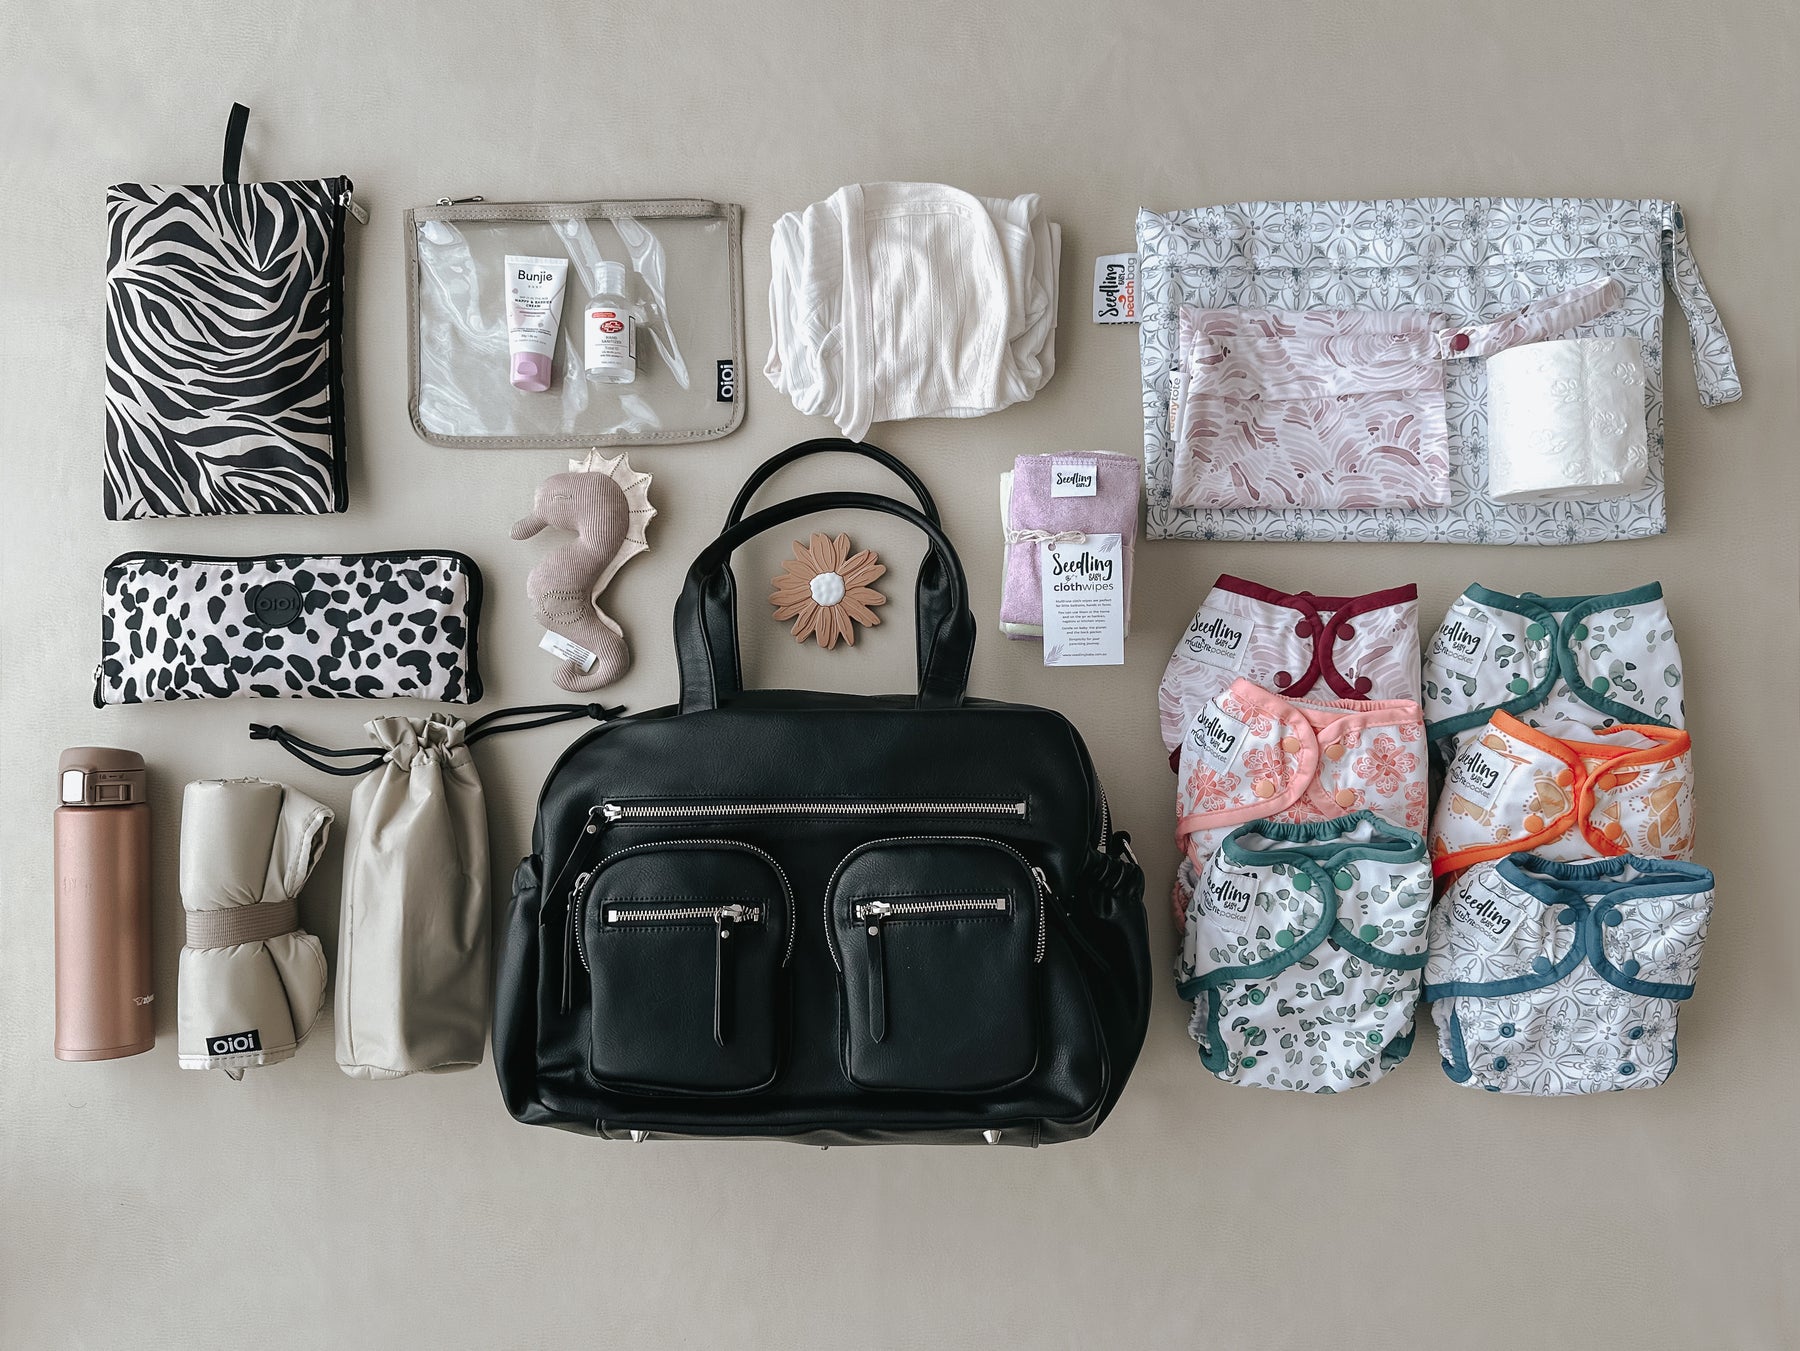 How To Pack a Baby Bag with Cloth Nappies